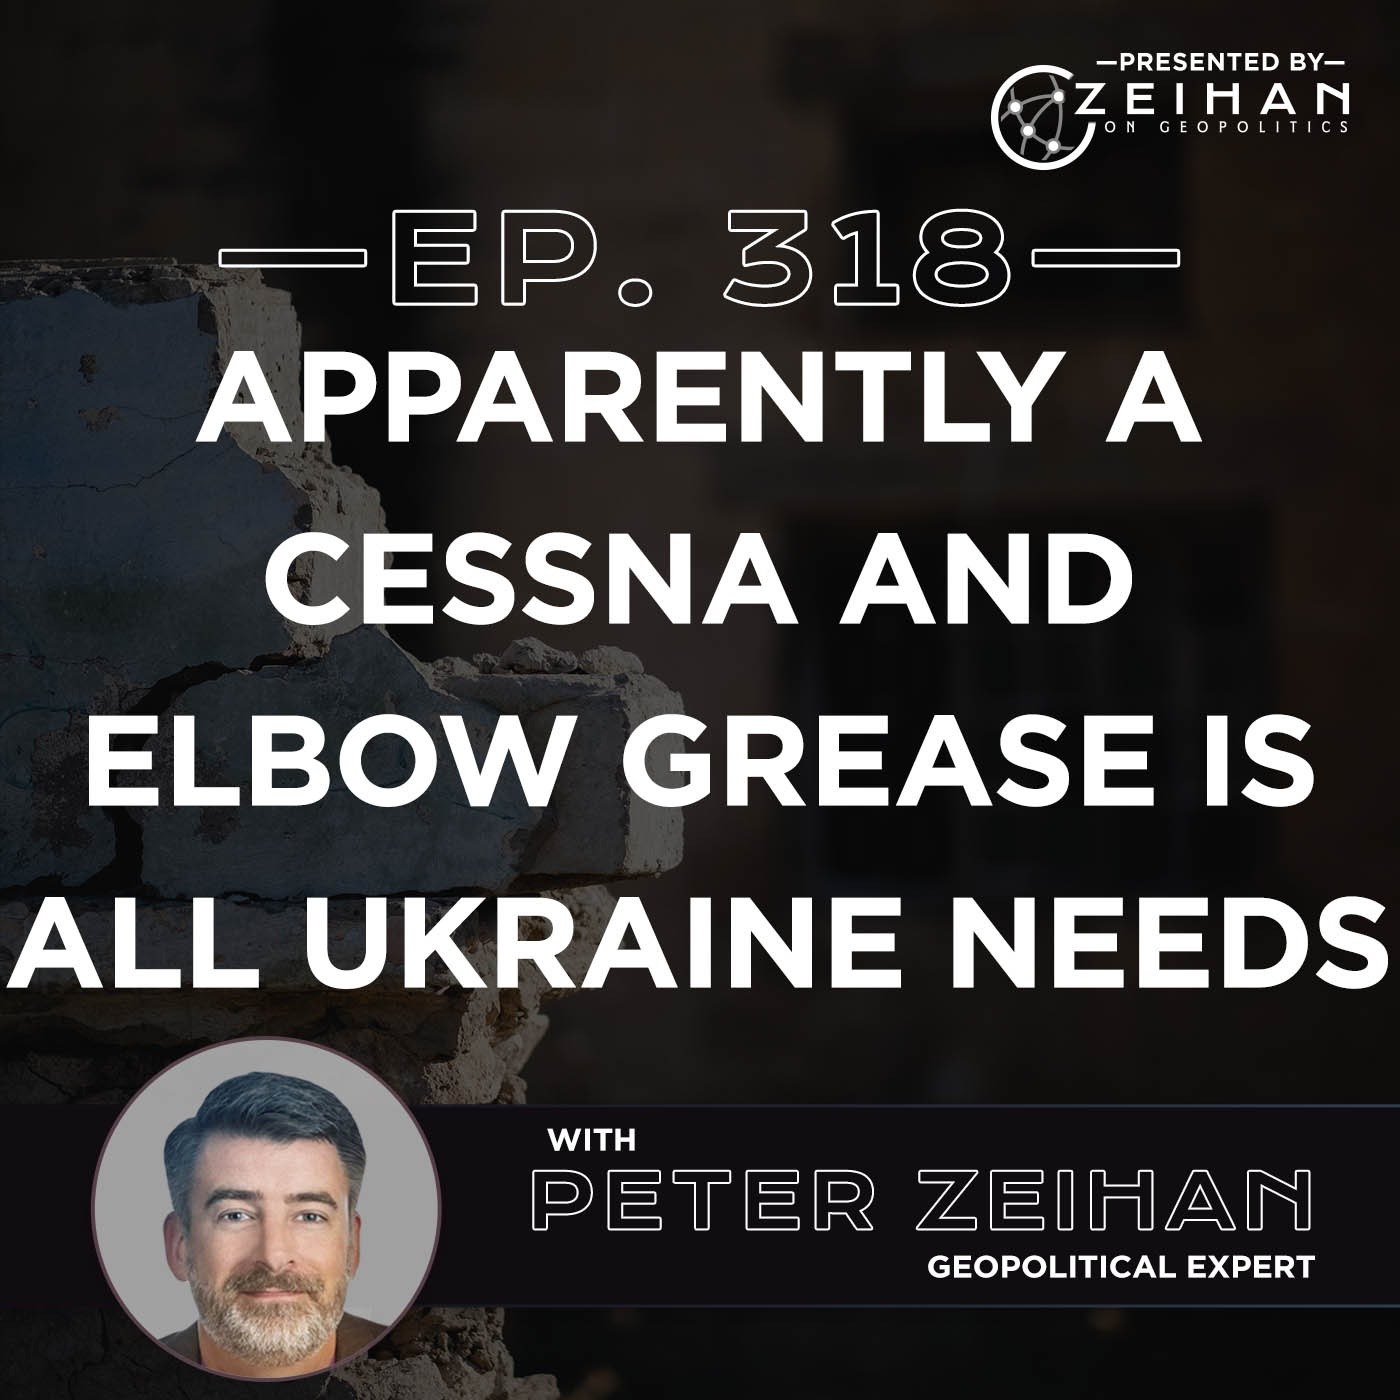 Apparently A Cessna and Elbow Grease Is All Ukraine Needs || Peter Zeihan